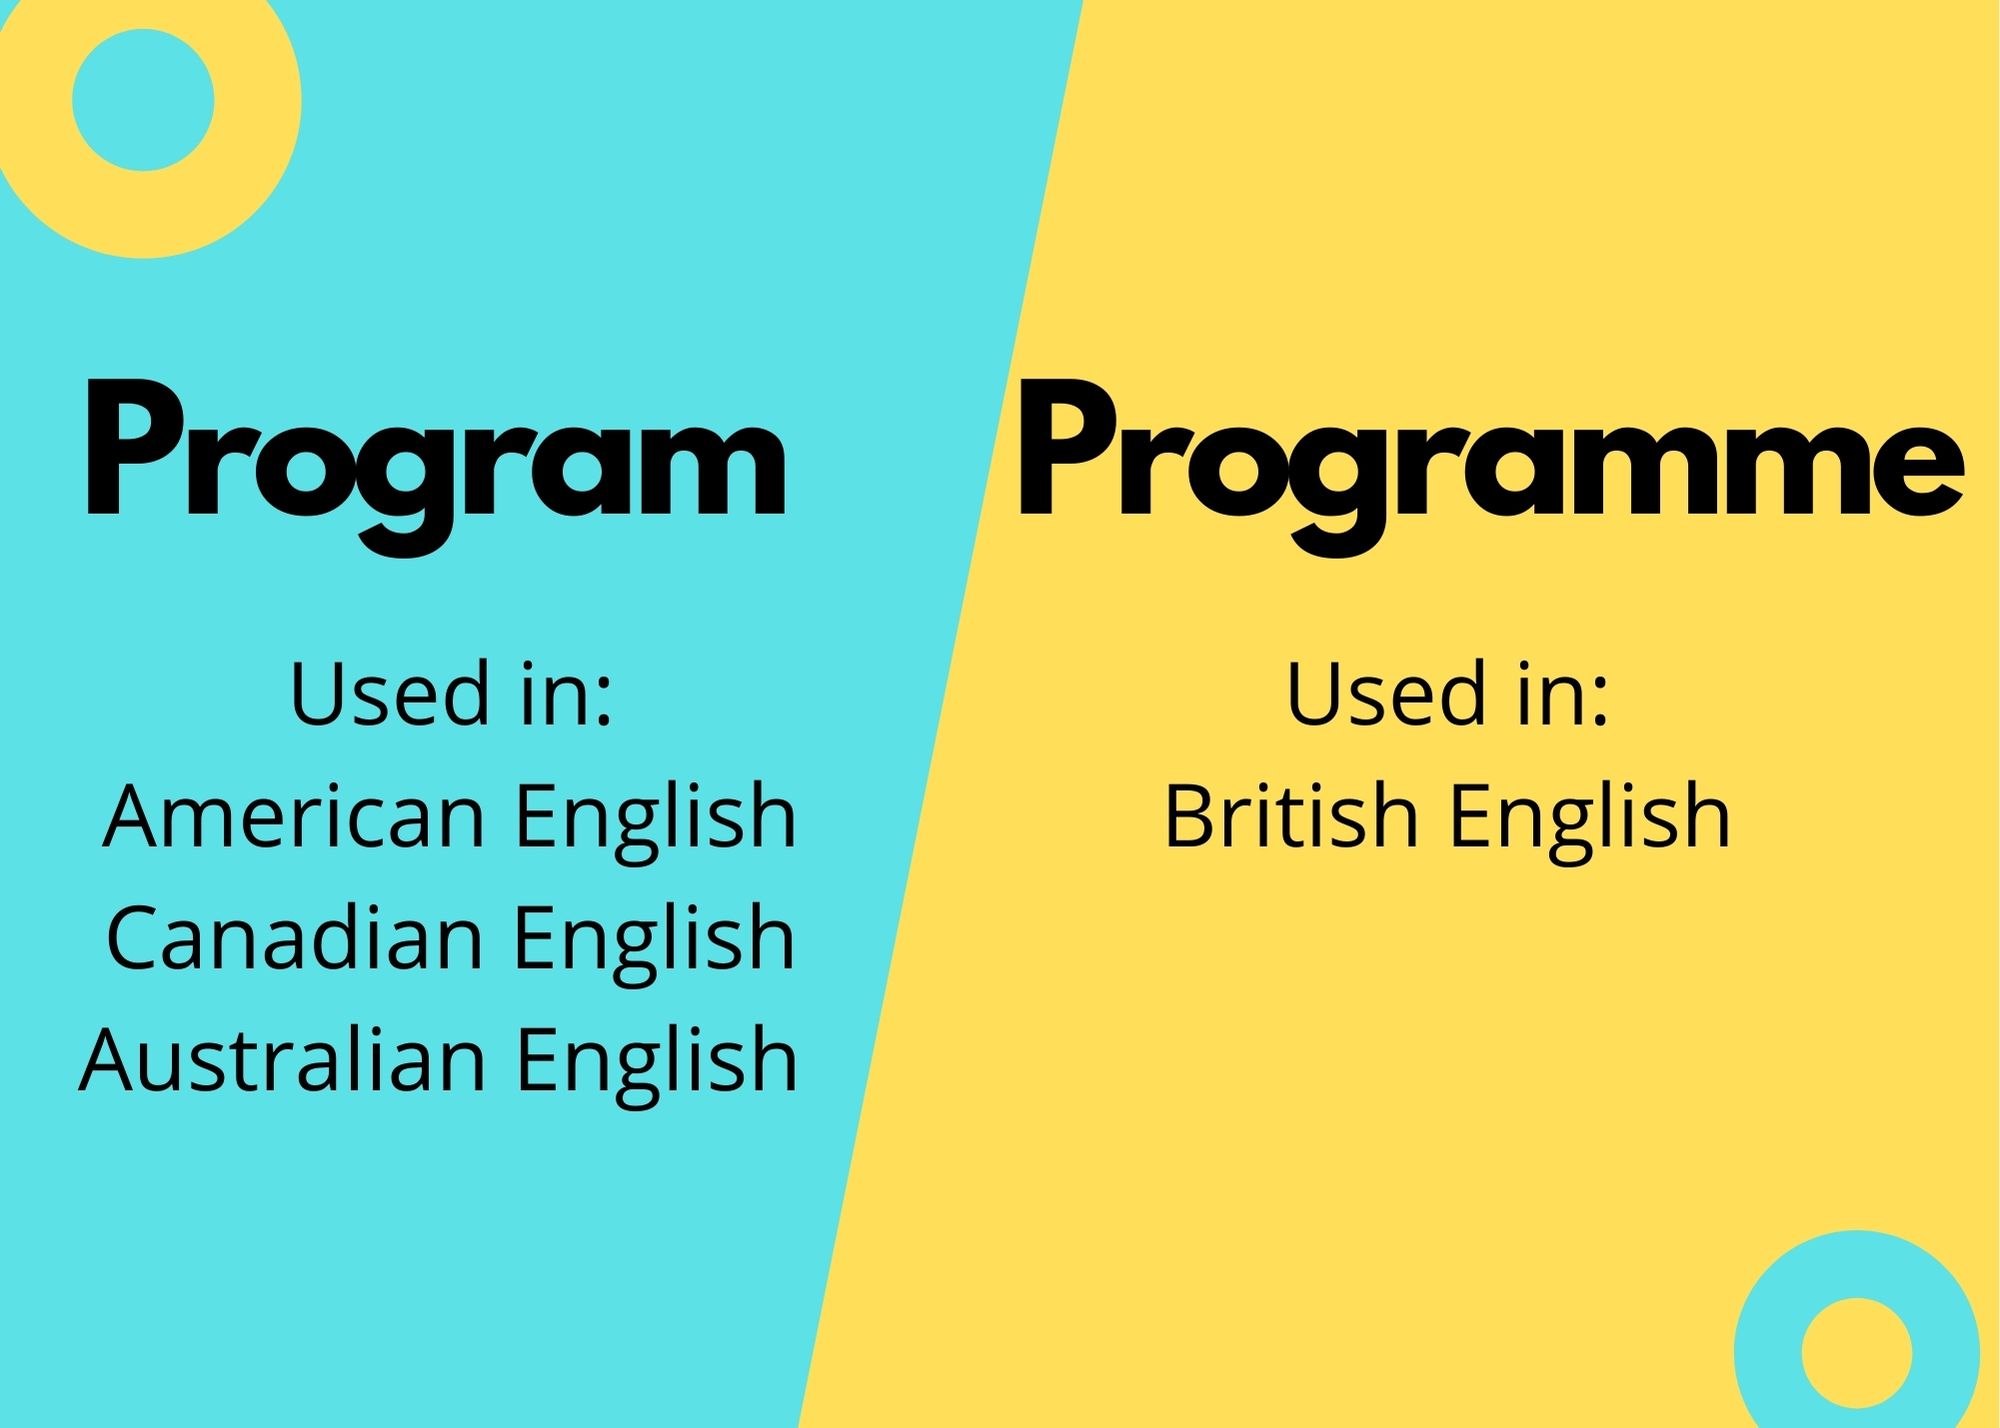 Graphic showing difference in usage of Program and Programme